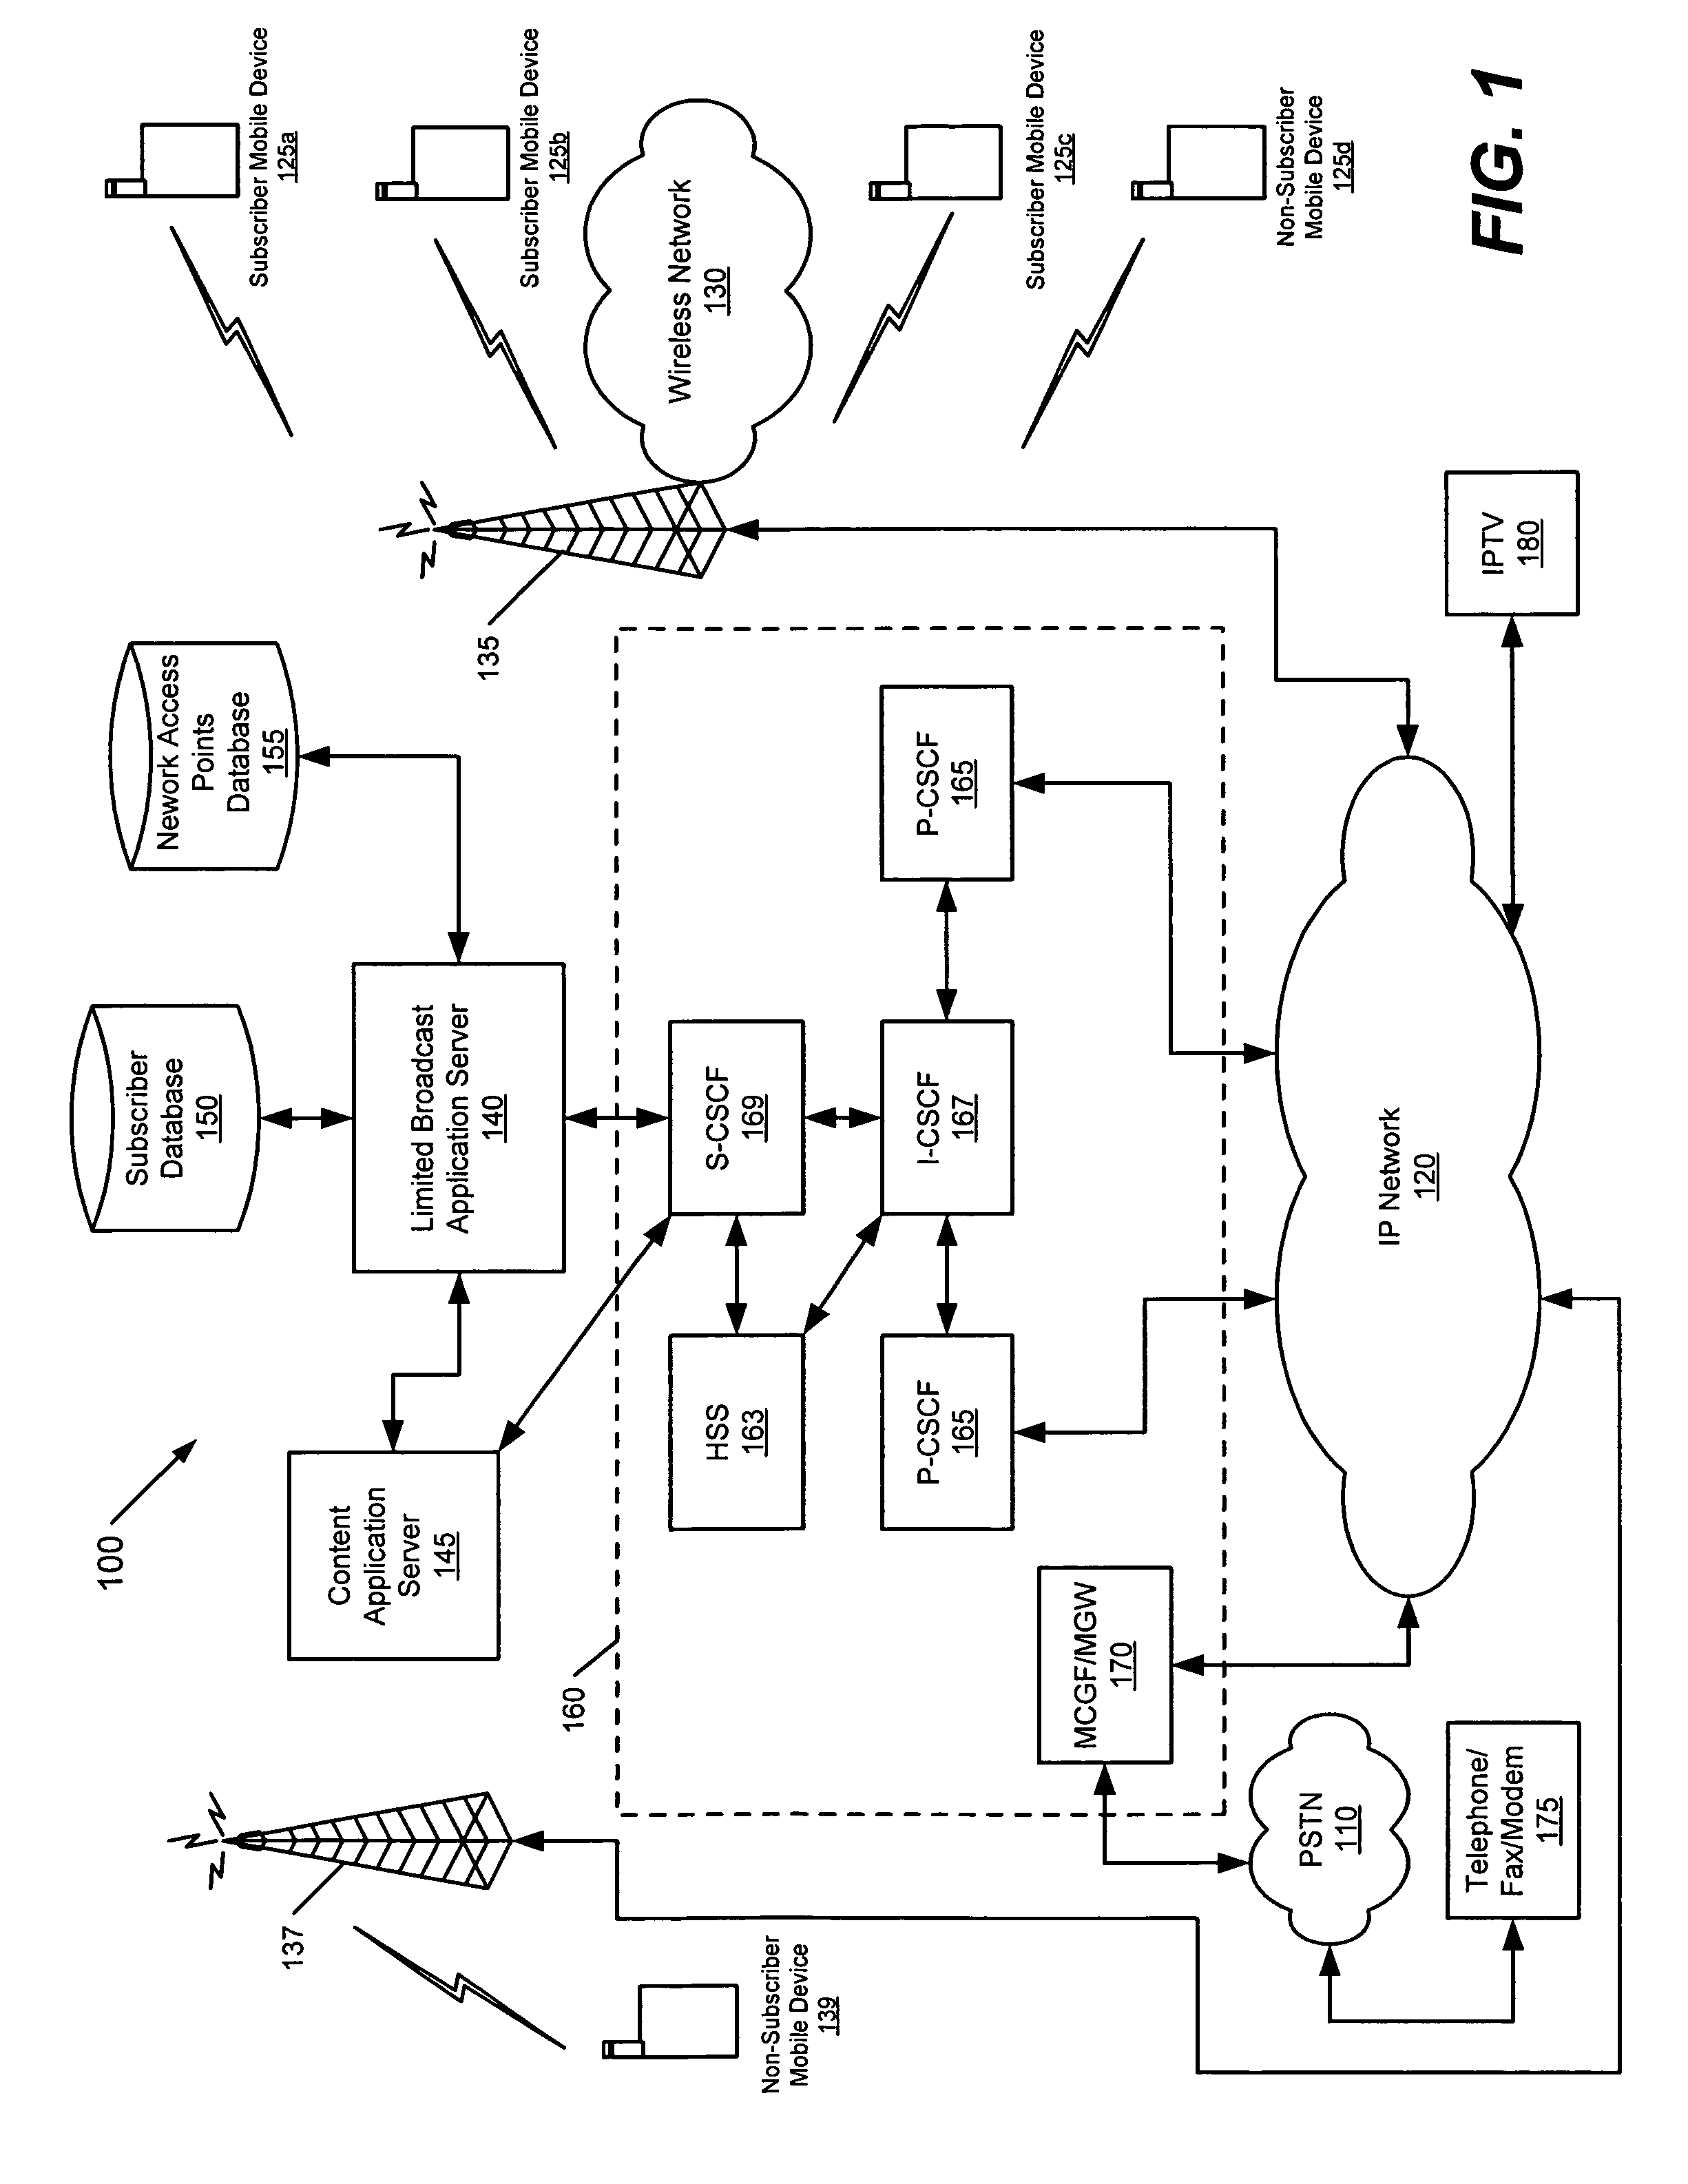 Methods, systems, and computer program products for providing multimedia information services over a communication network